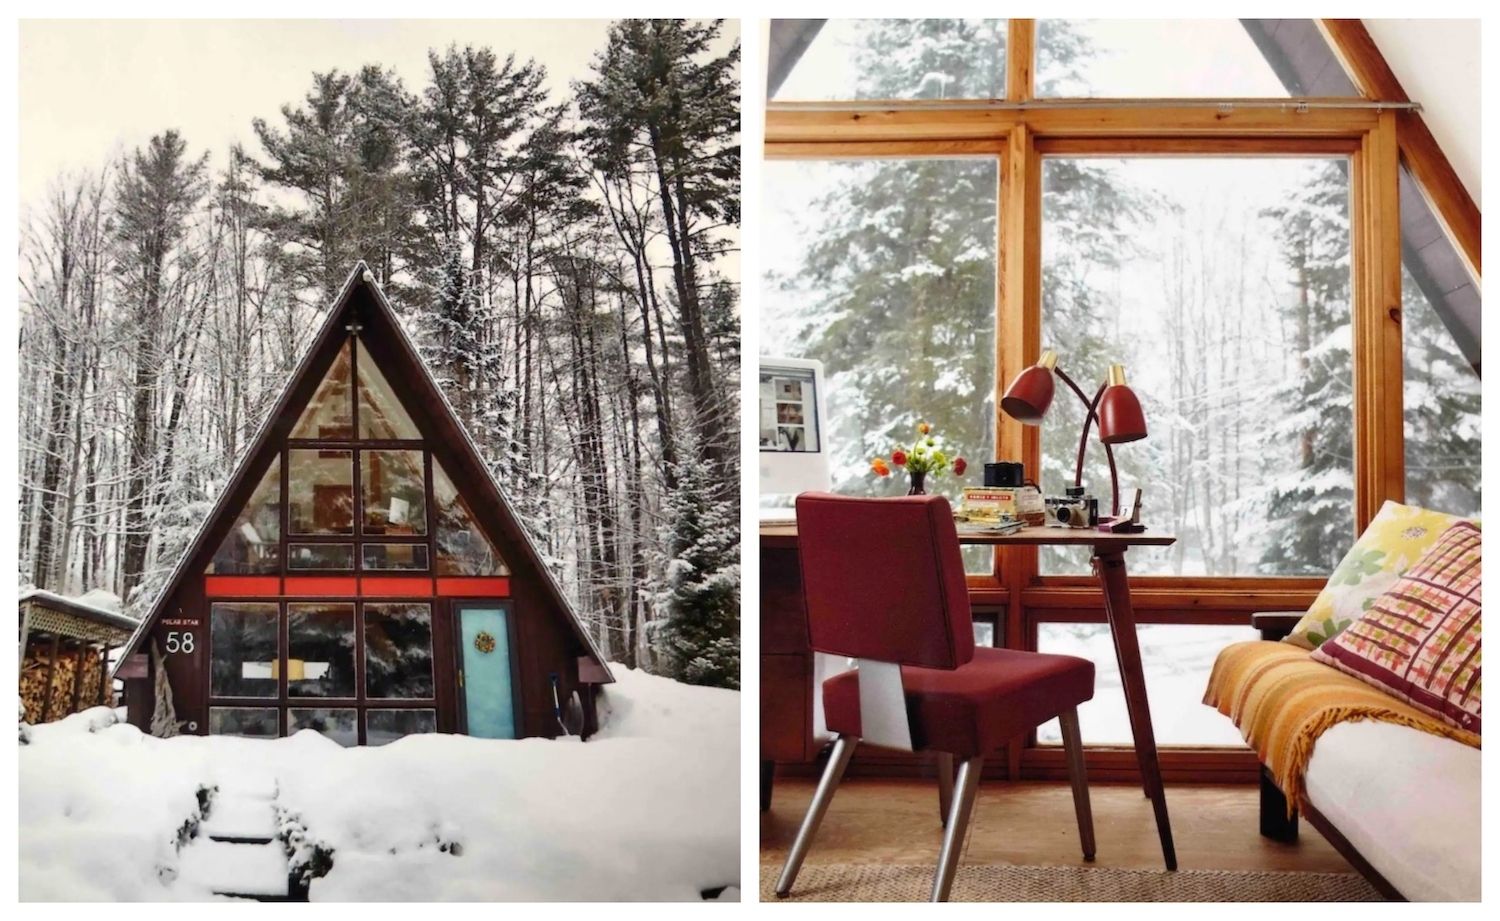 Airbnb cabins in New Hampshire during the winter